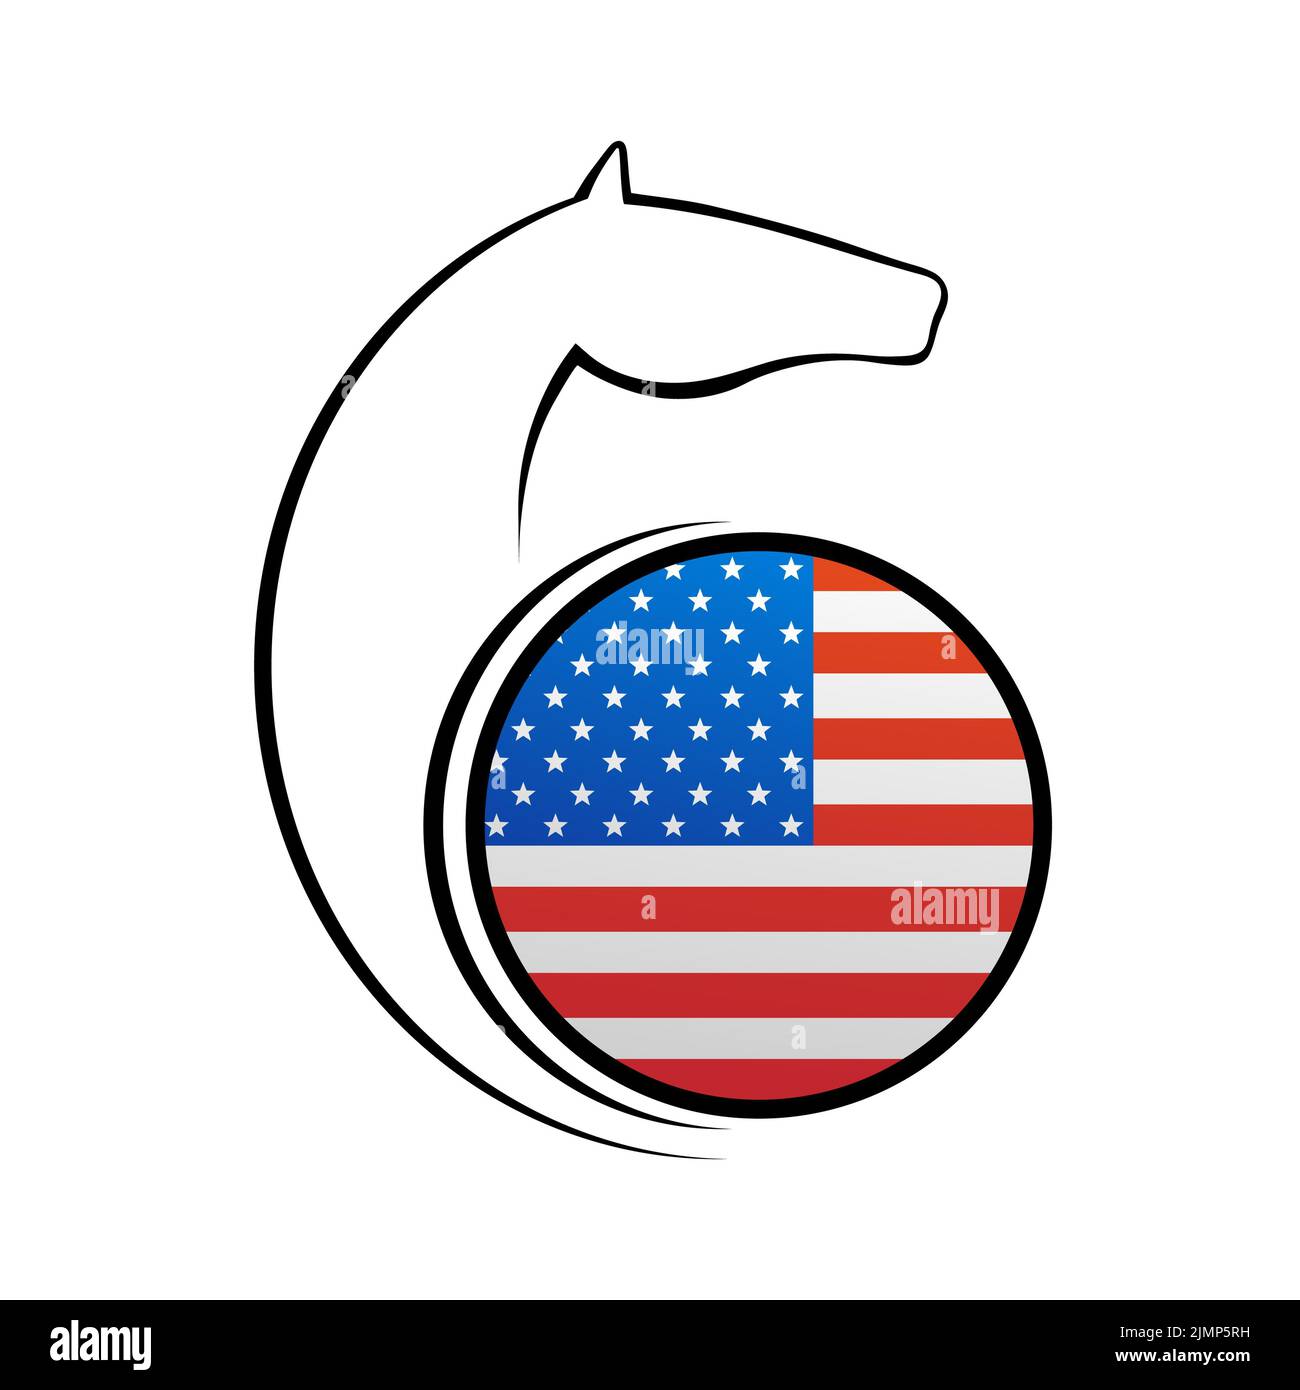 Horse symbol with USA flag vector element Stock Photo